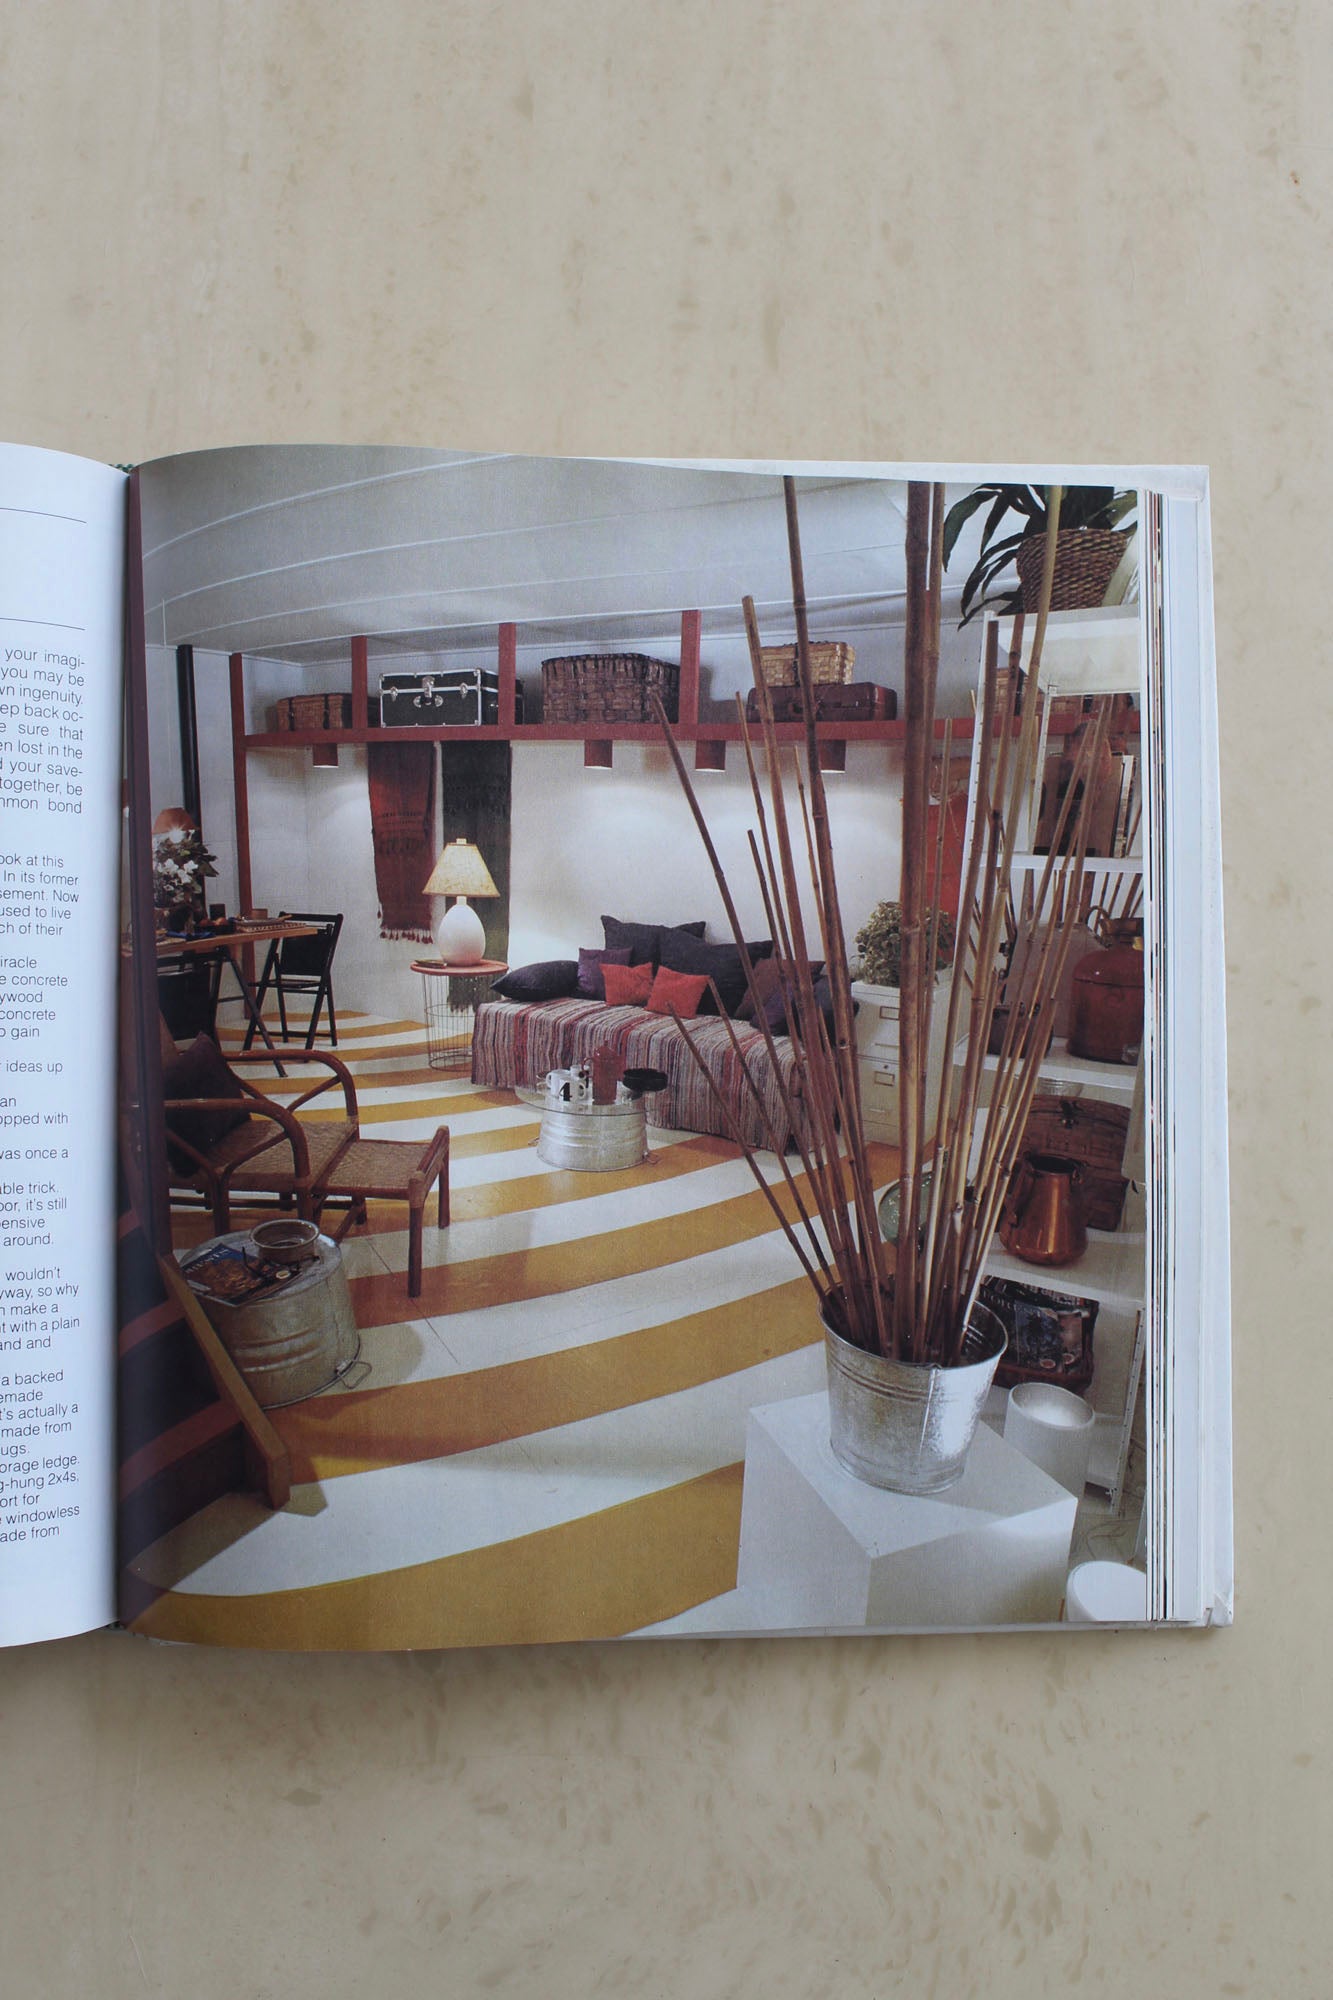 New Decorating Book By Better Homes and Gardens, 1981.